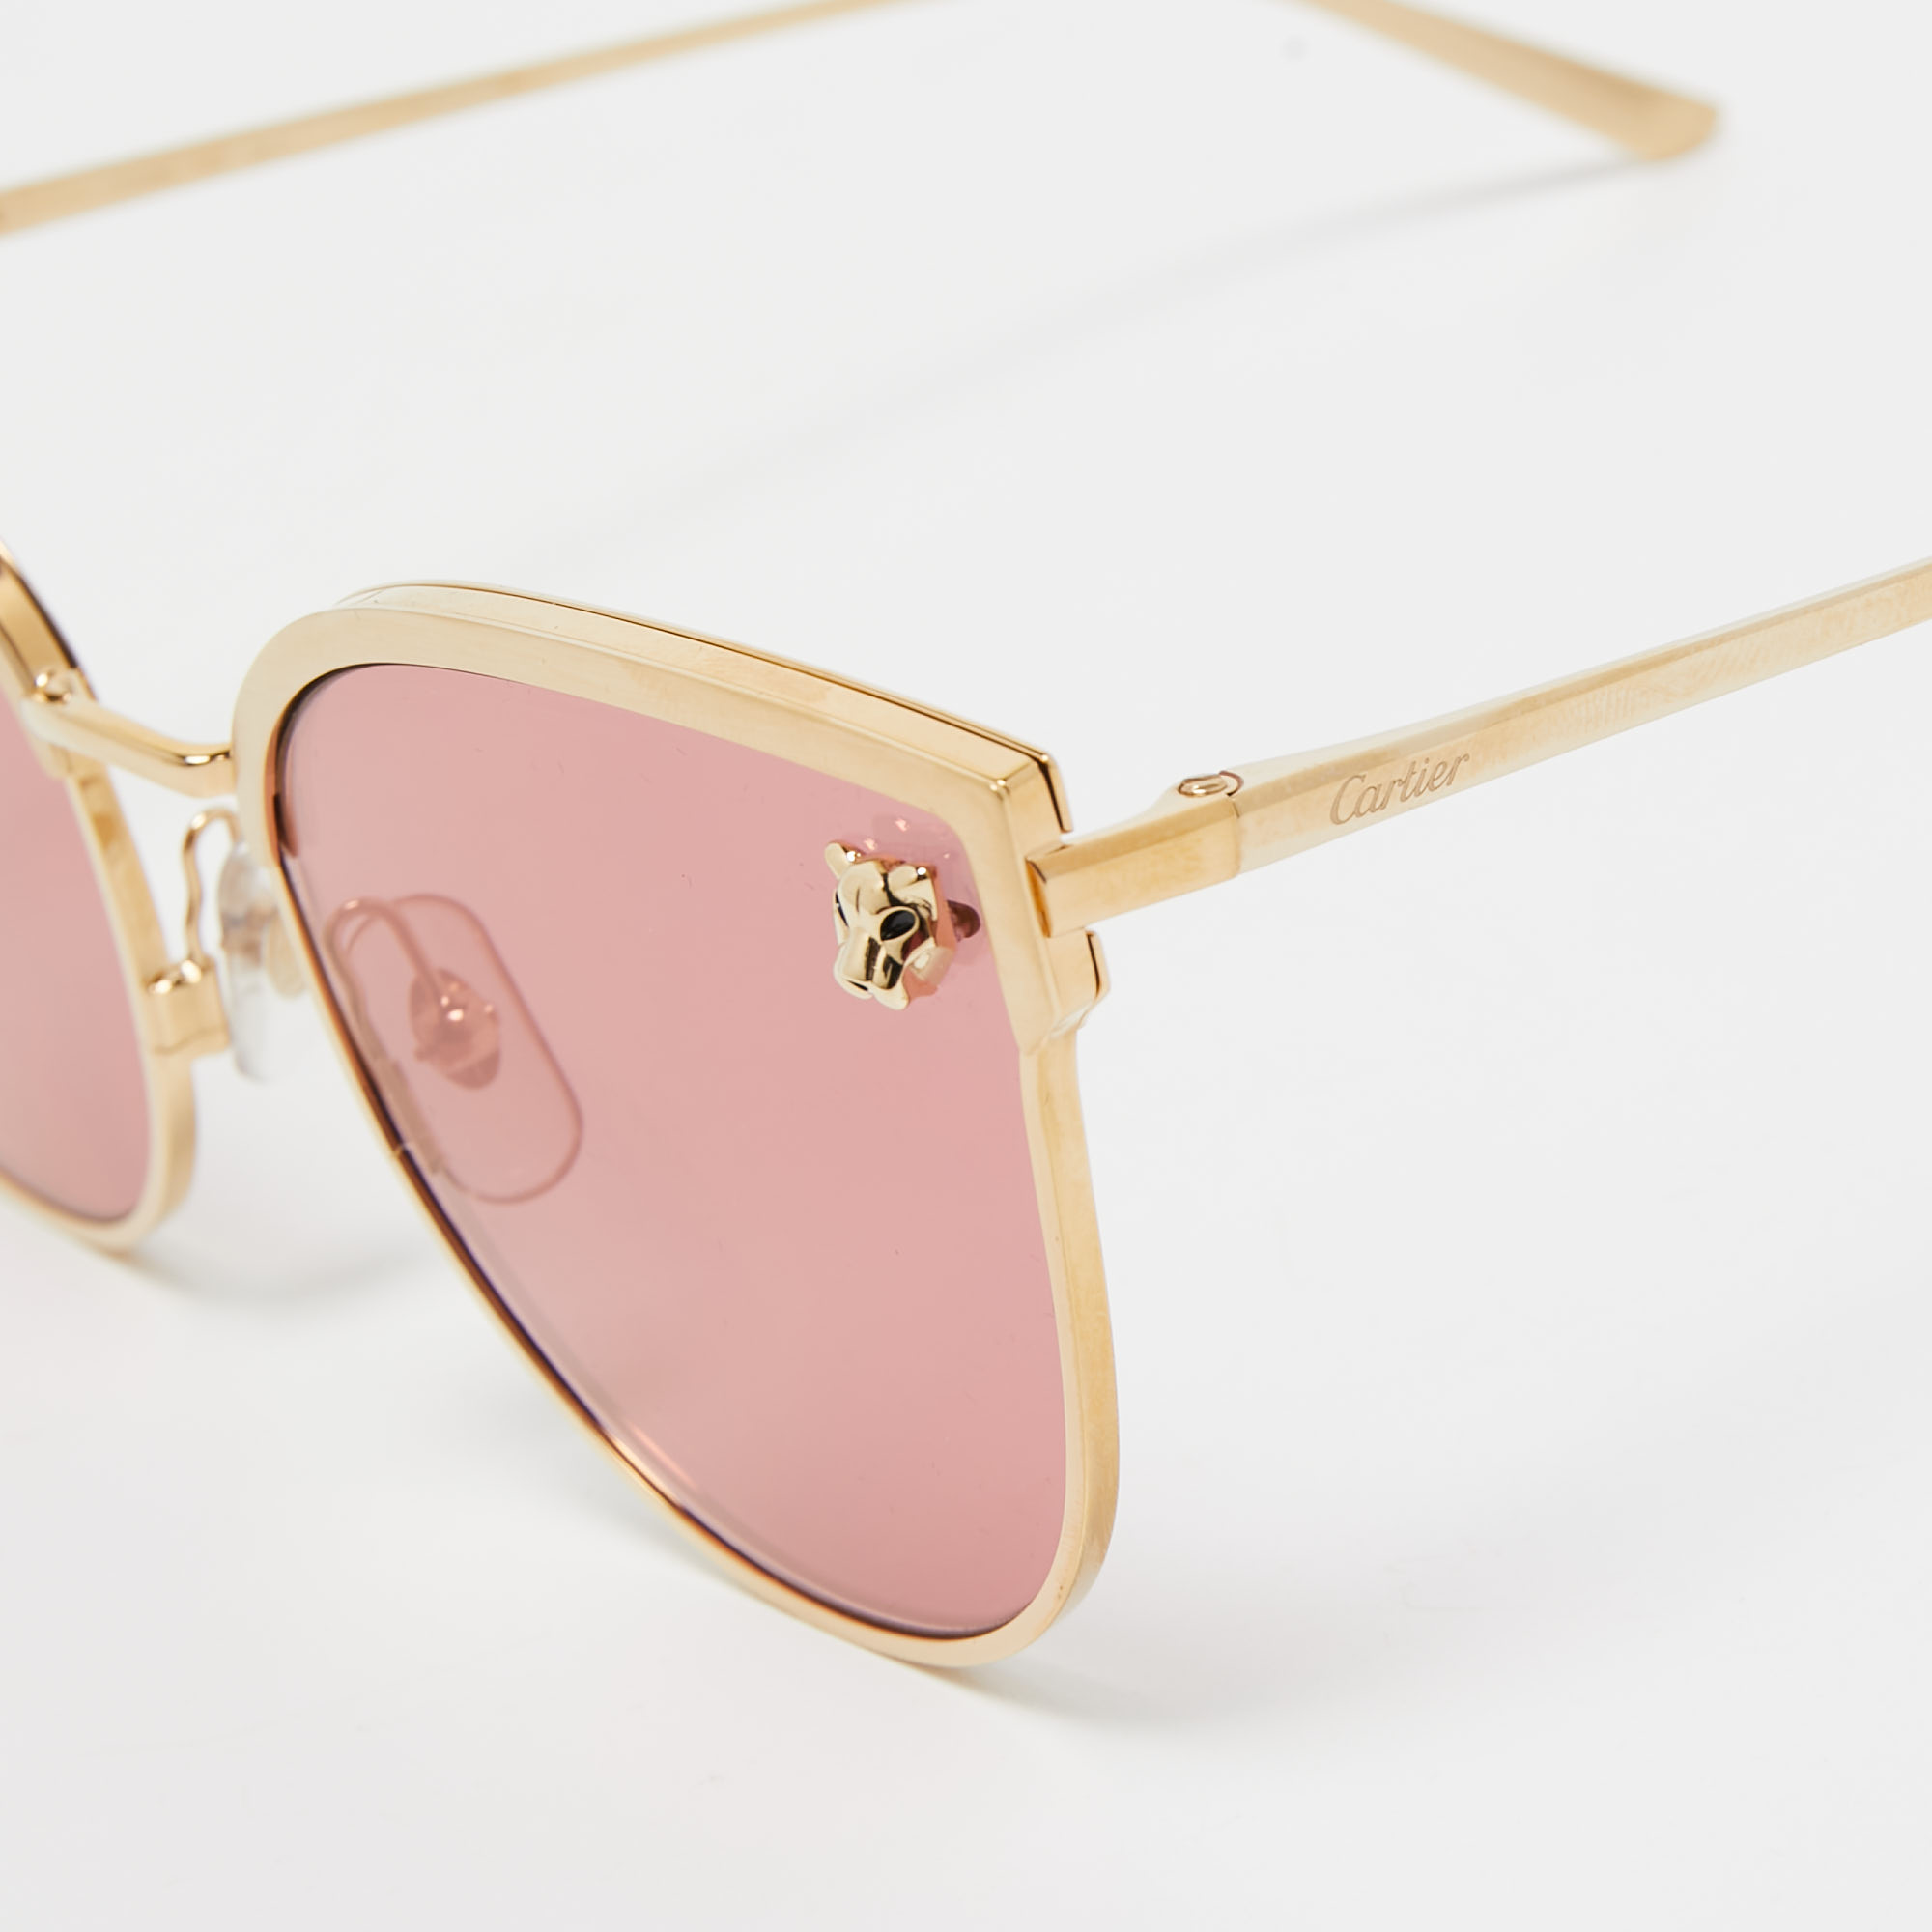 Cartier Pink/Gold CT0198S Panthere Cat Eye Sunglasses